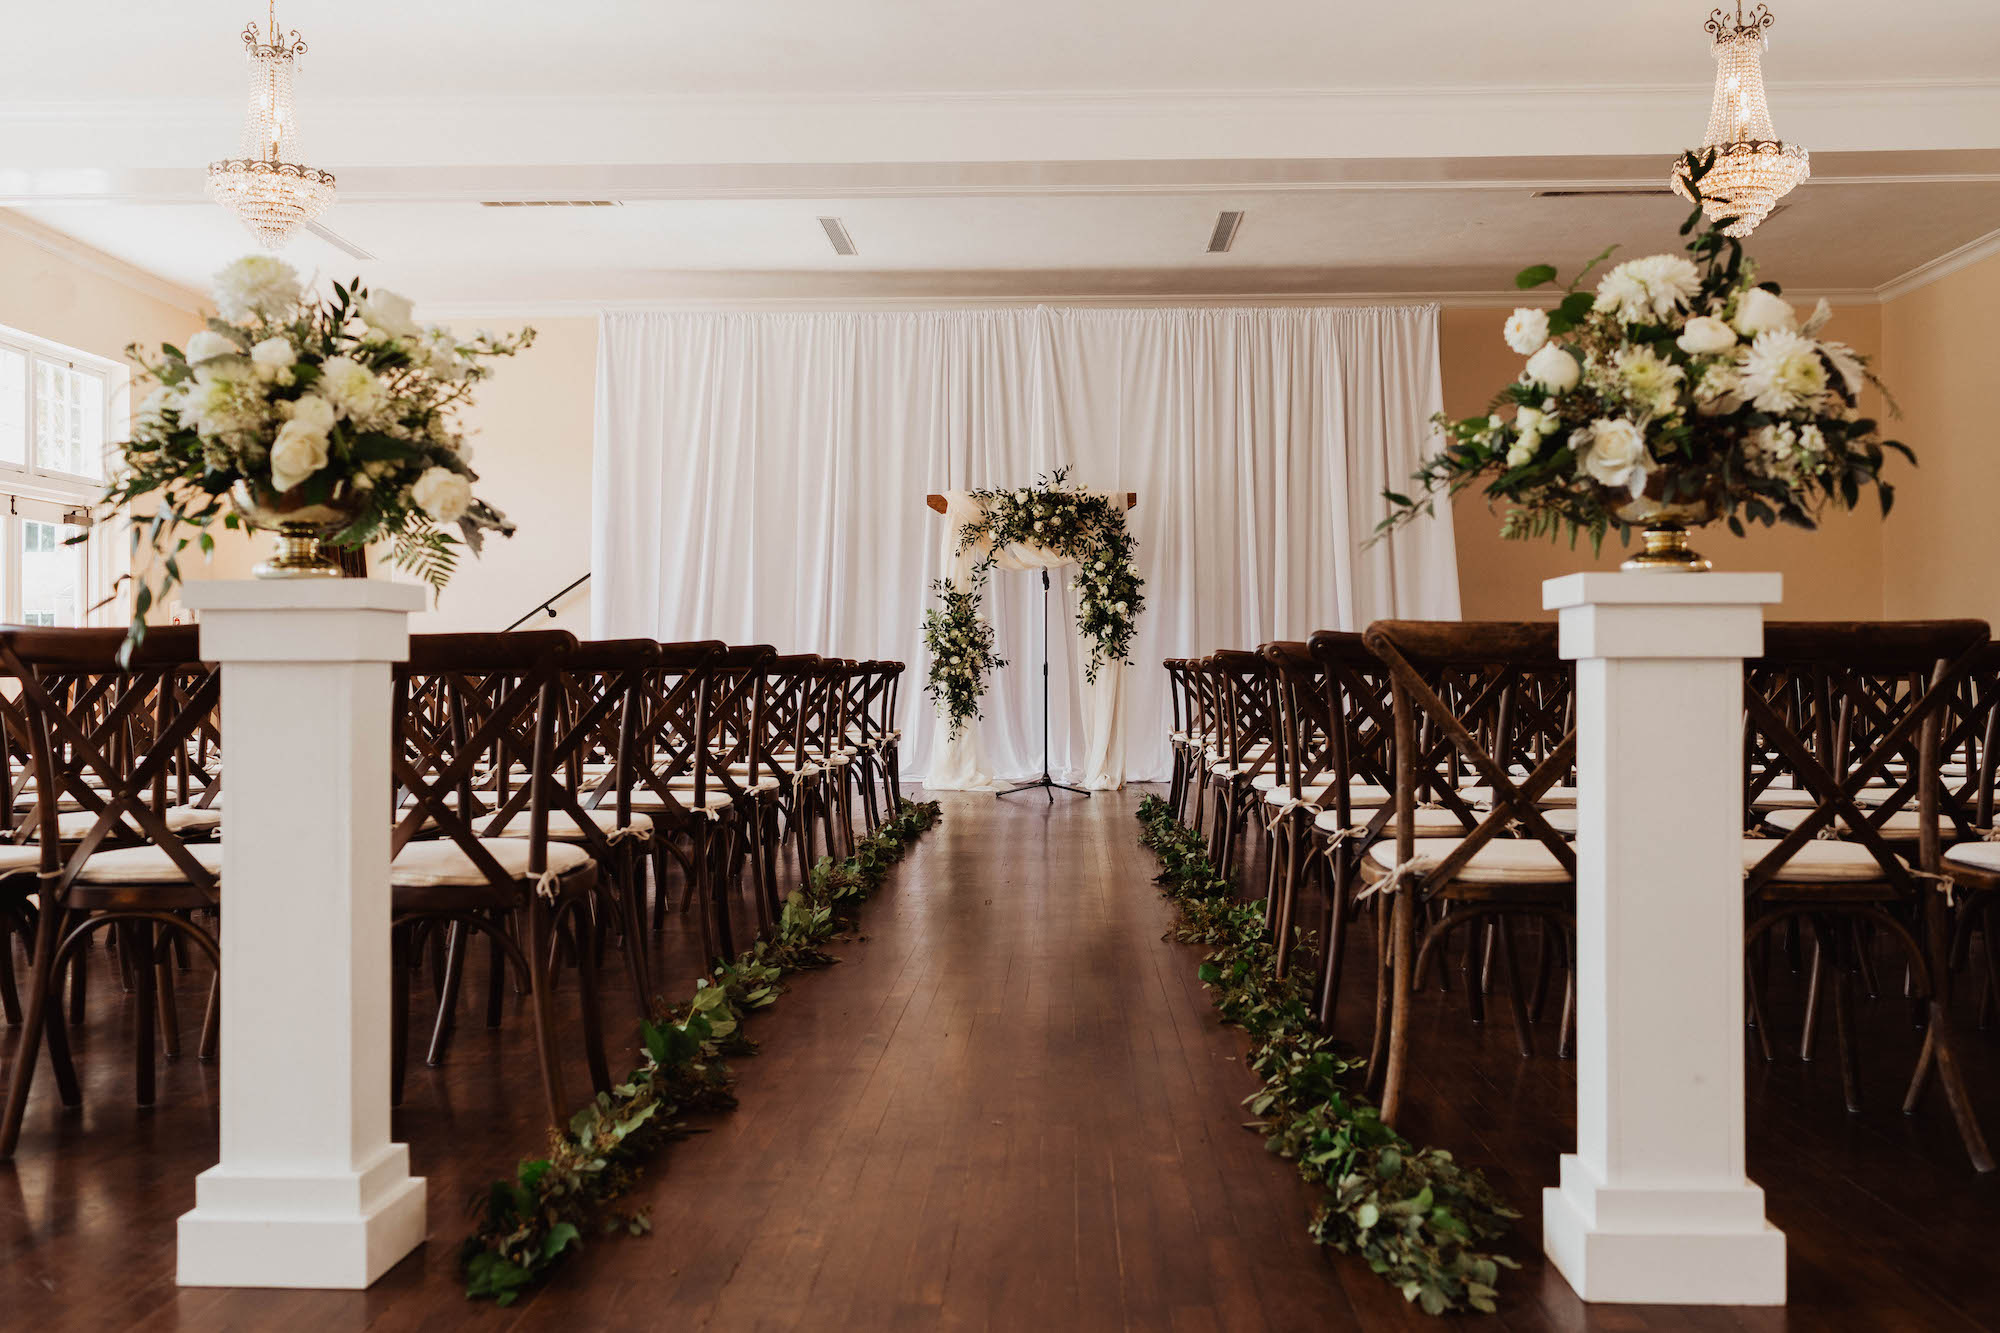 Simple Elegant Wedding Ceremony Decor, Mahogany Chiavari Chairs, White Pedestals with Ivory Roses and Eucalyptus Arrangements, White Draping and Arch | South Tampa Wedding Venue The Orlo